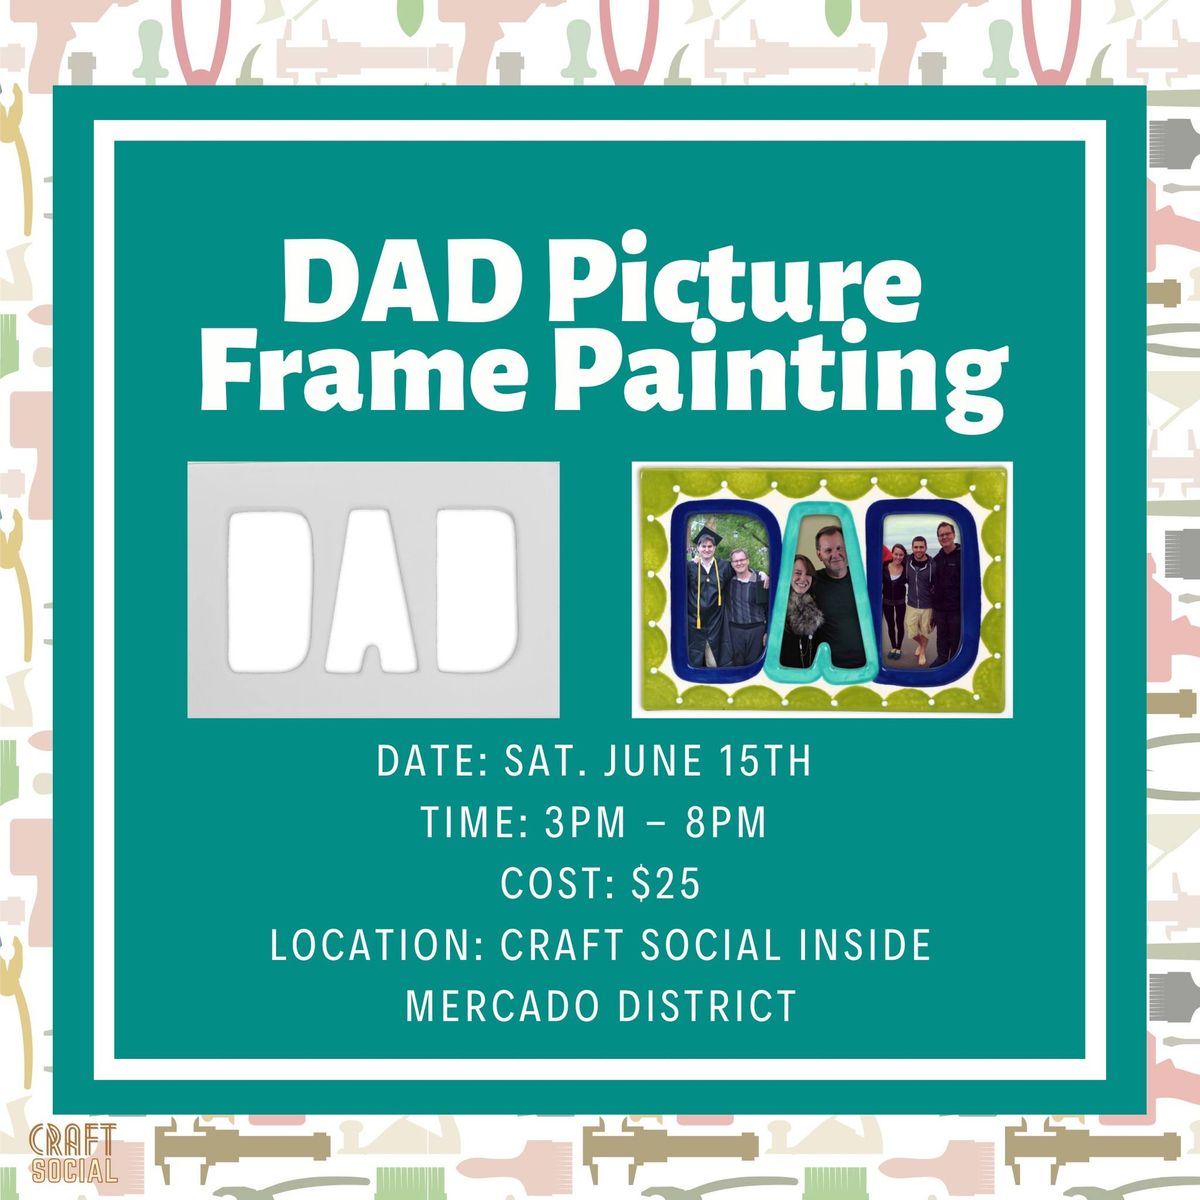 Dad Picture Frame Painting